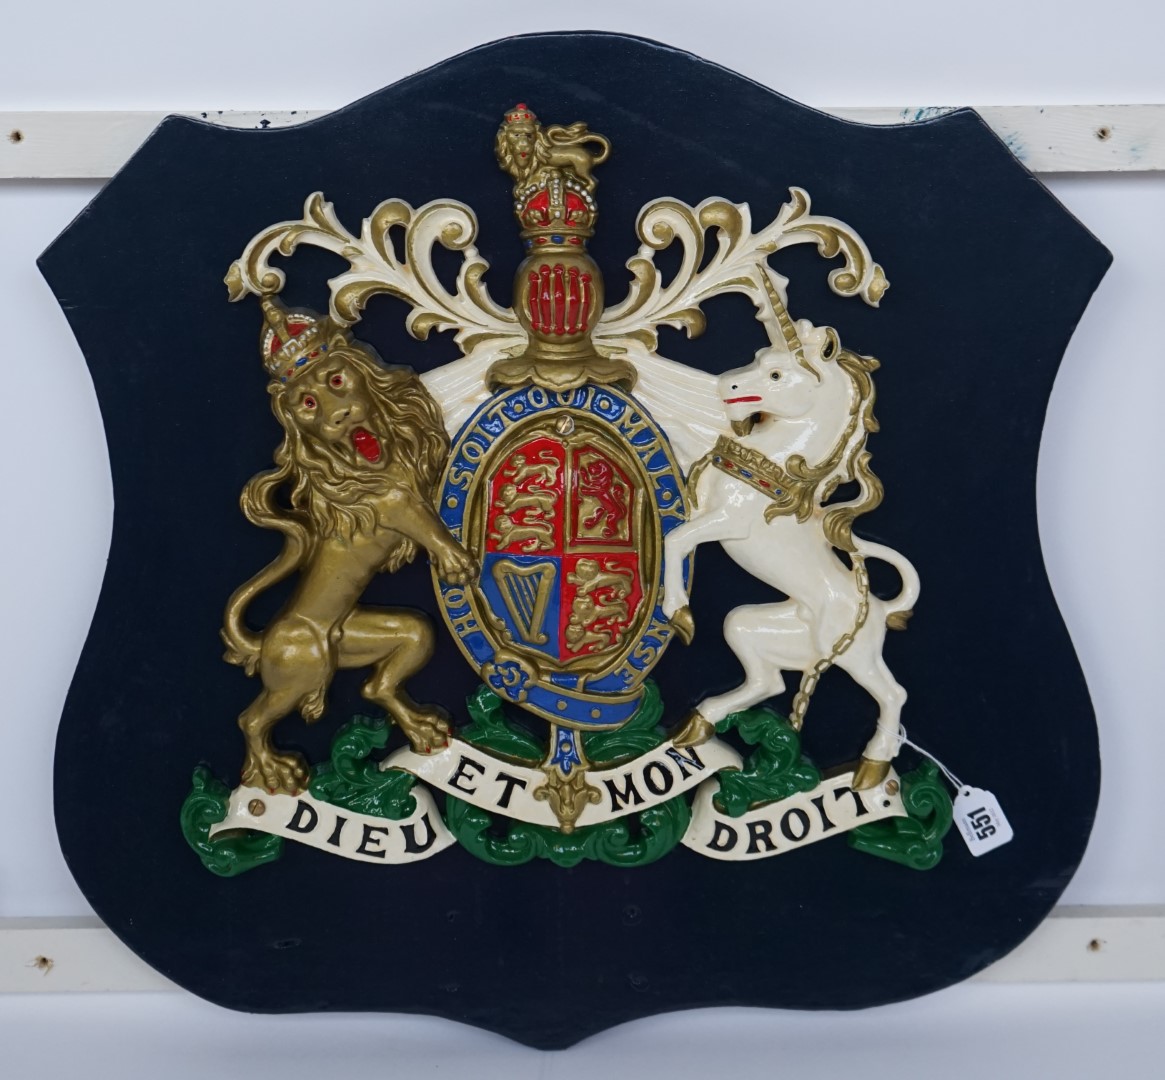 A QUEEN ELIZABETH II PAINTED ALLOY ROYAL COAT-OF-ARMS - Image 2 of 2